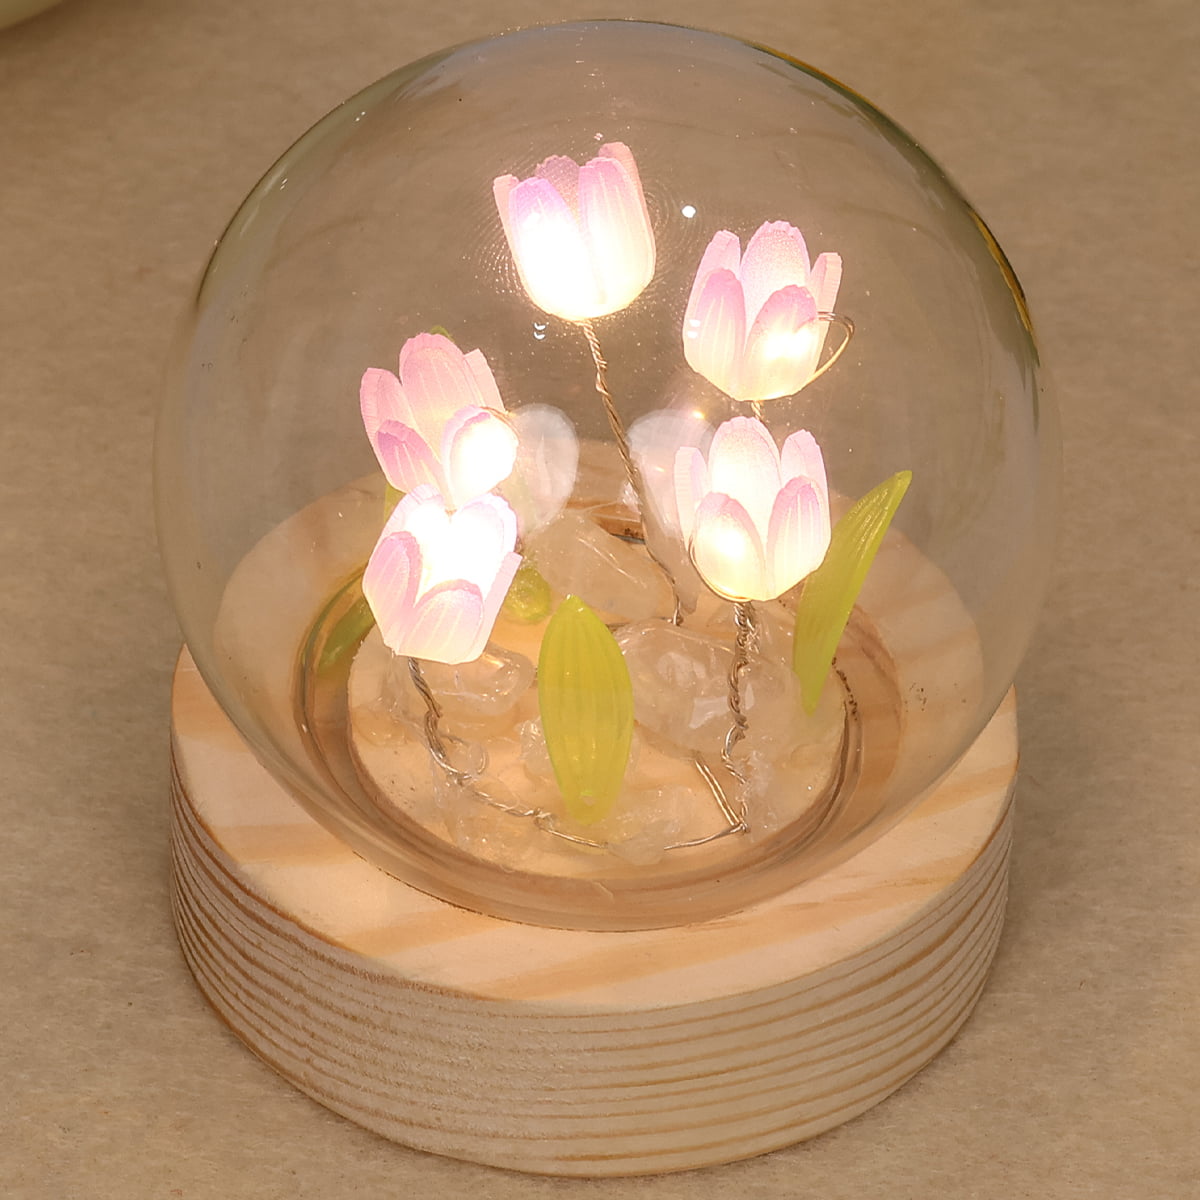 A set of flower-shaped candles that'll turn your bathtub into a peaceful  garden. They'll float in the tub and add a little mood lighting while you  take a relaxi…